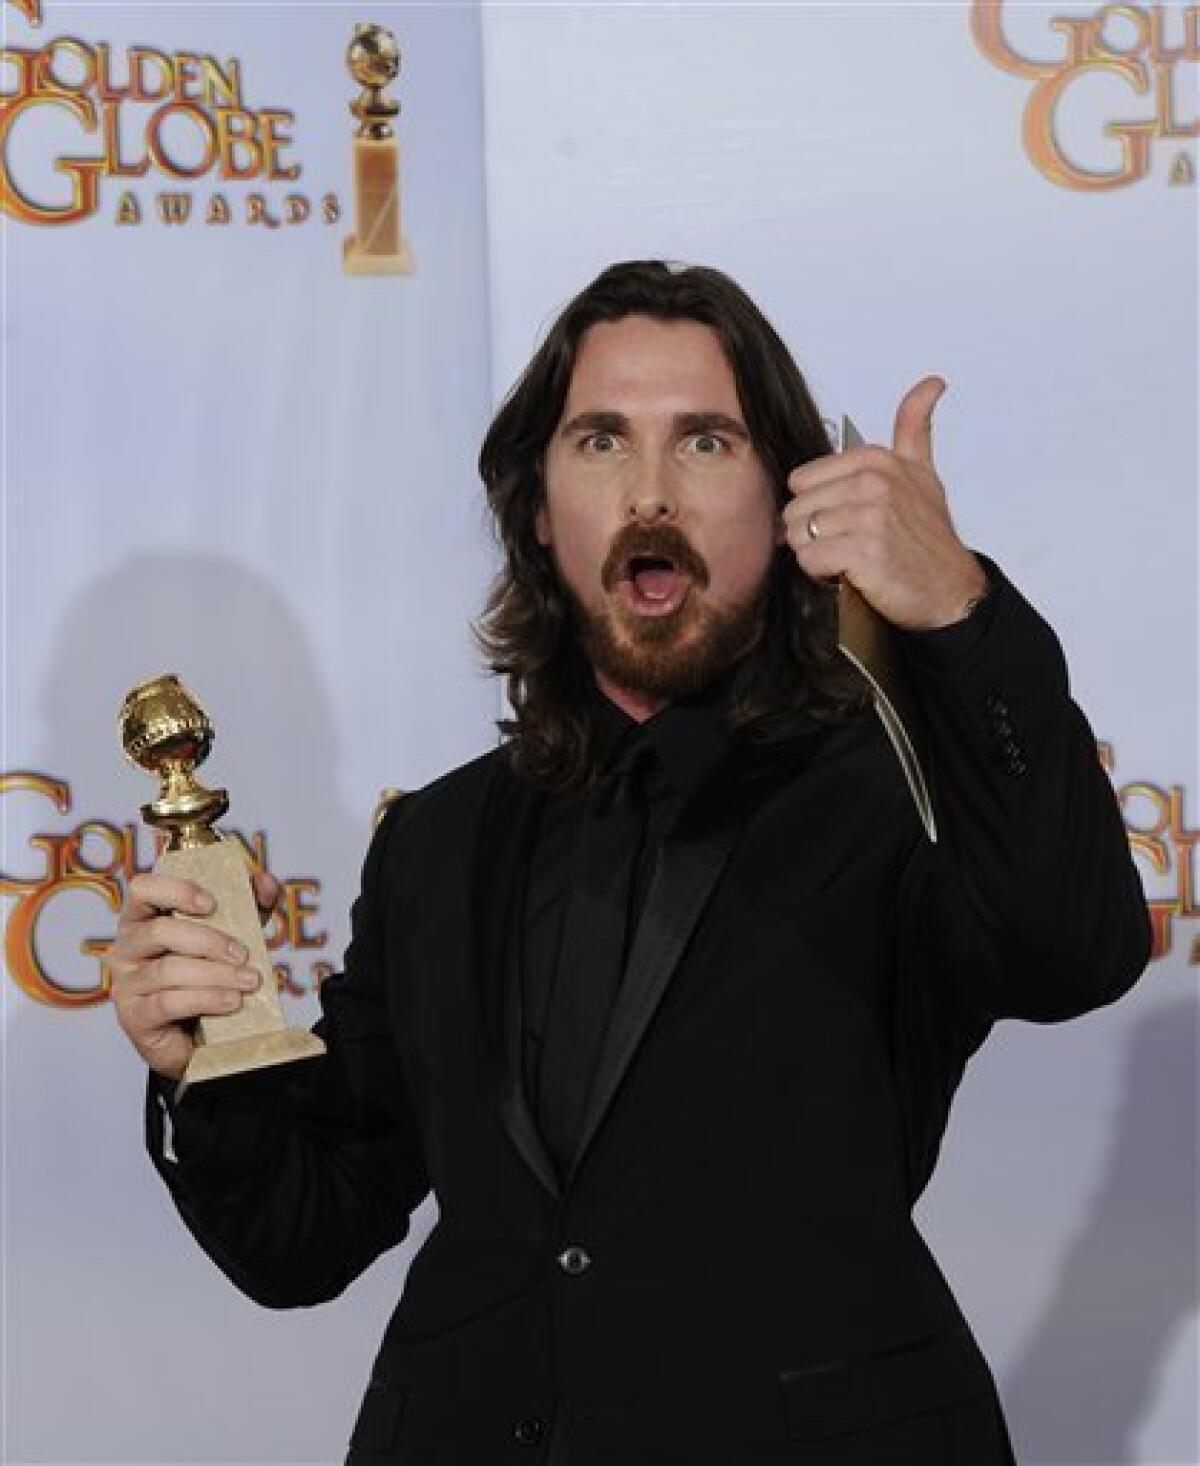 Christian Bale holds up his trophy for Best Performance by an Actor in a Supporting Role in a Motion Picture for his role in "The Fighter," during the Golden Globe Awards Sunday, Jan. 16, 2011, in Beverly Hills, Calif. (AP Photo/Mark J. Terrill)